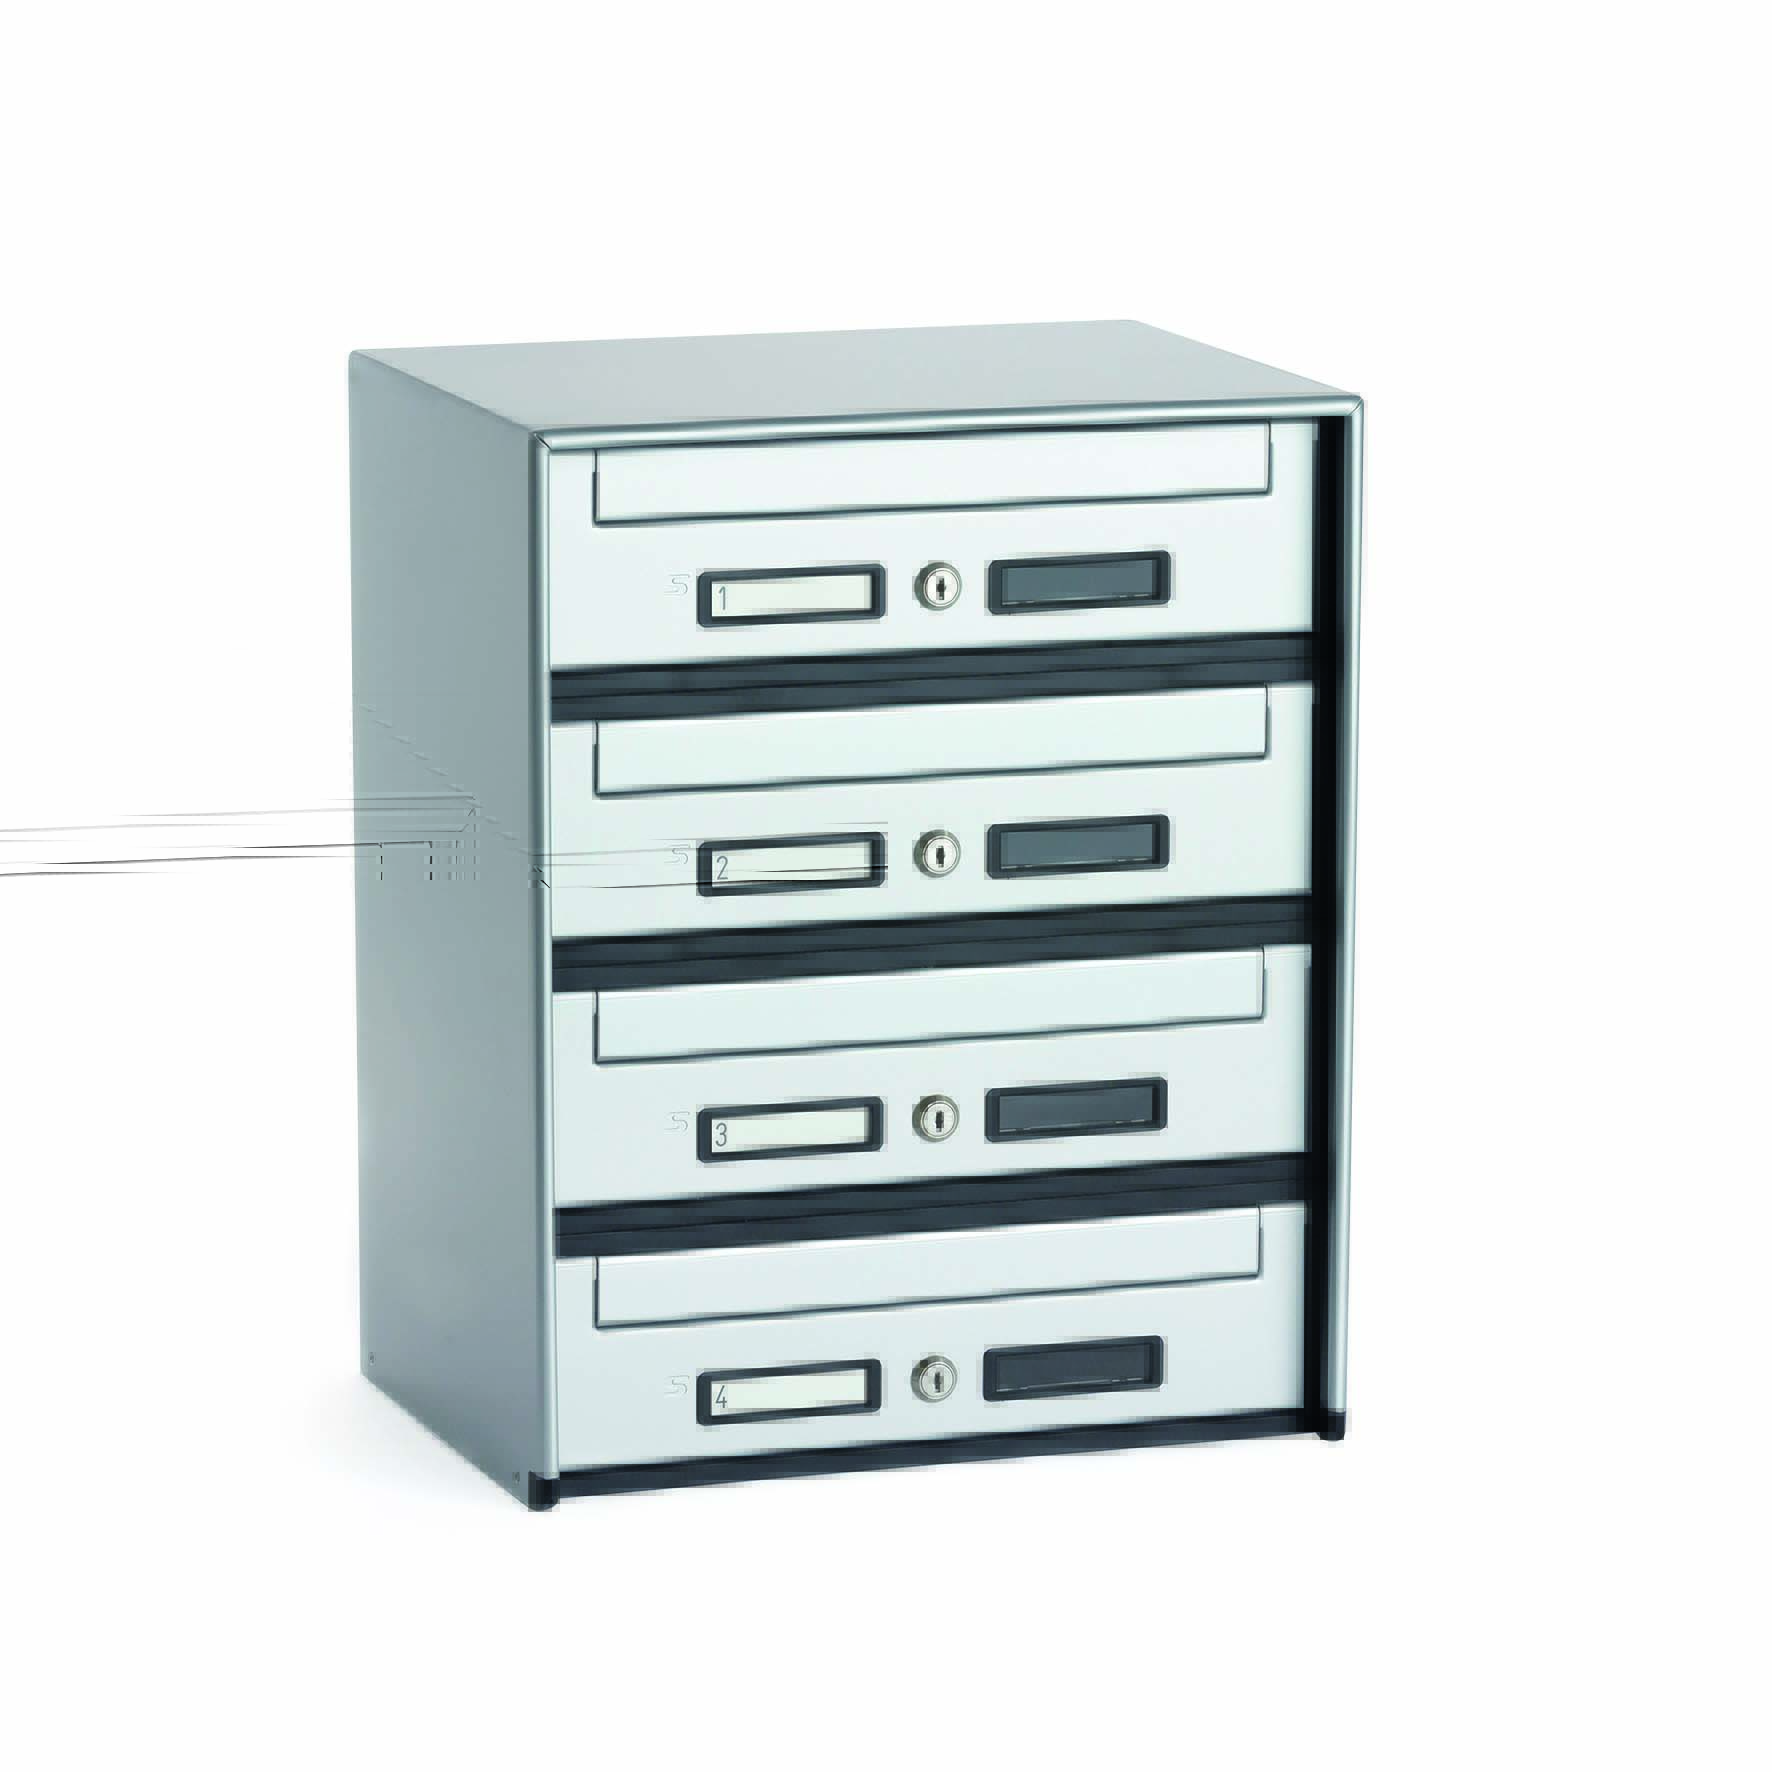 SC5 standard modular letterbox units with front mail collection - 5 mailboxes